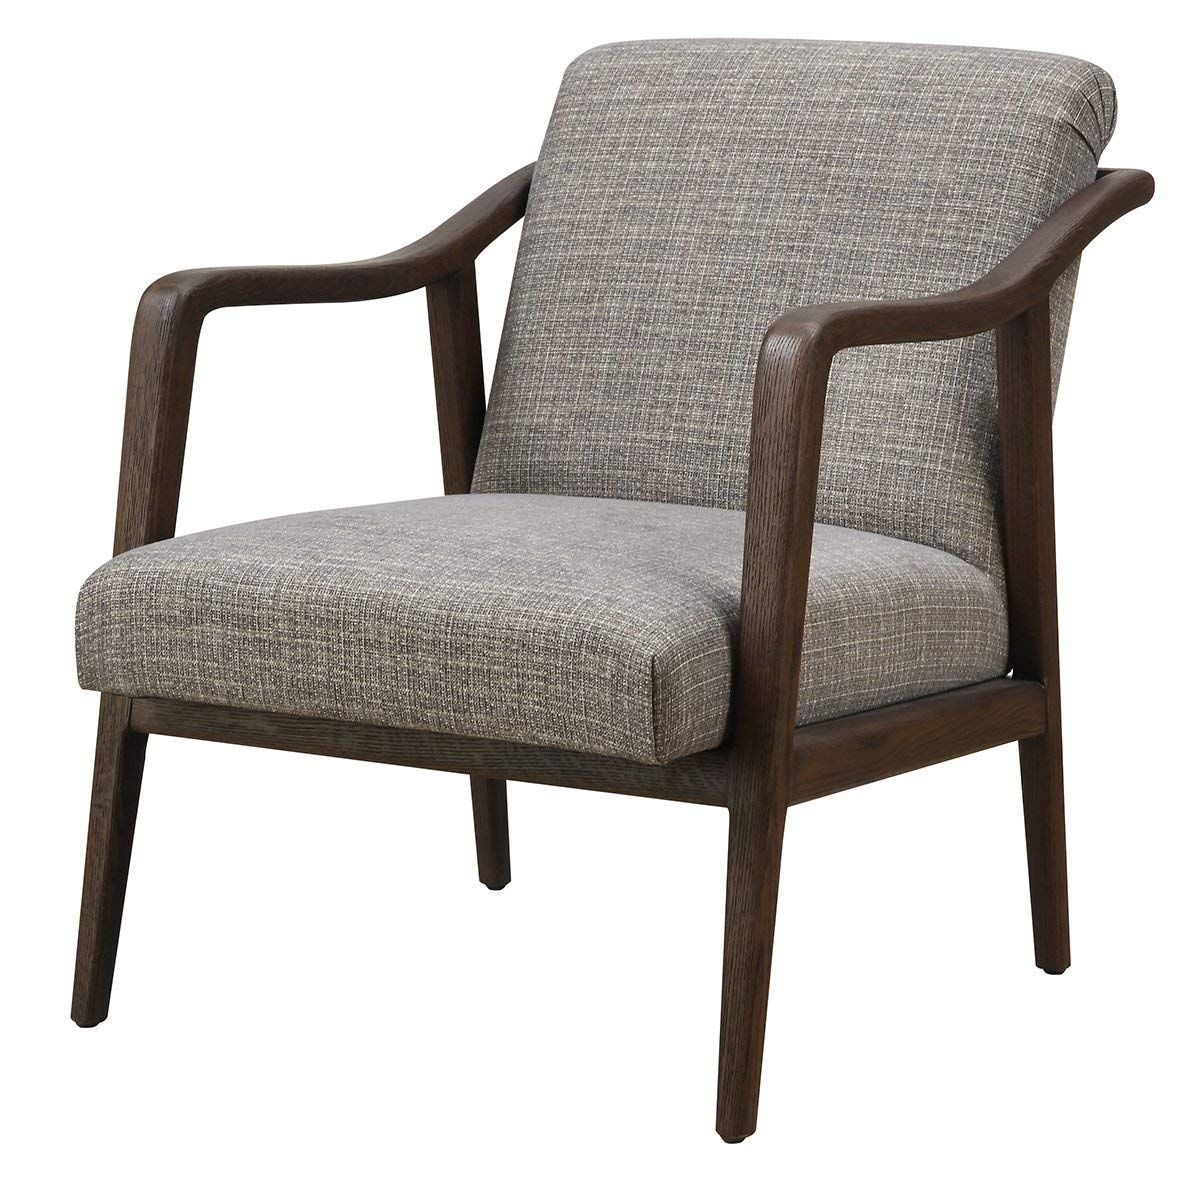 Amazon: Pulaski Ds D102006 Mid Century Wood Frame Accent Chair With Latest Garten Storm Chairs With Espresso Finish Set Of  (View 12 of 20)